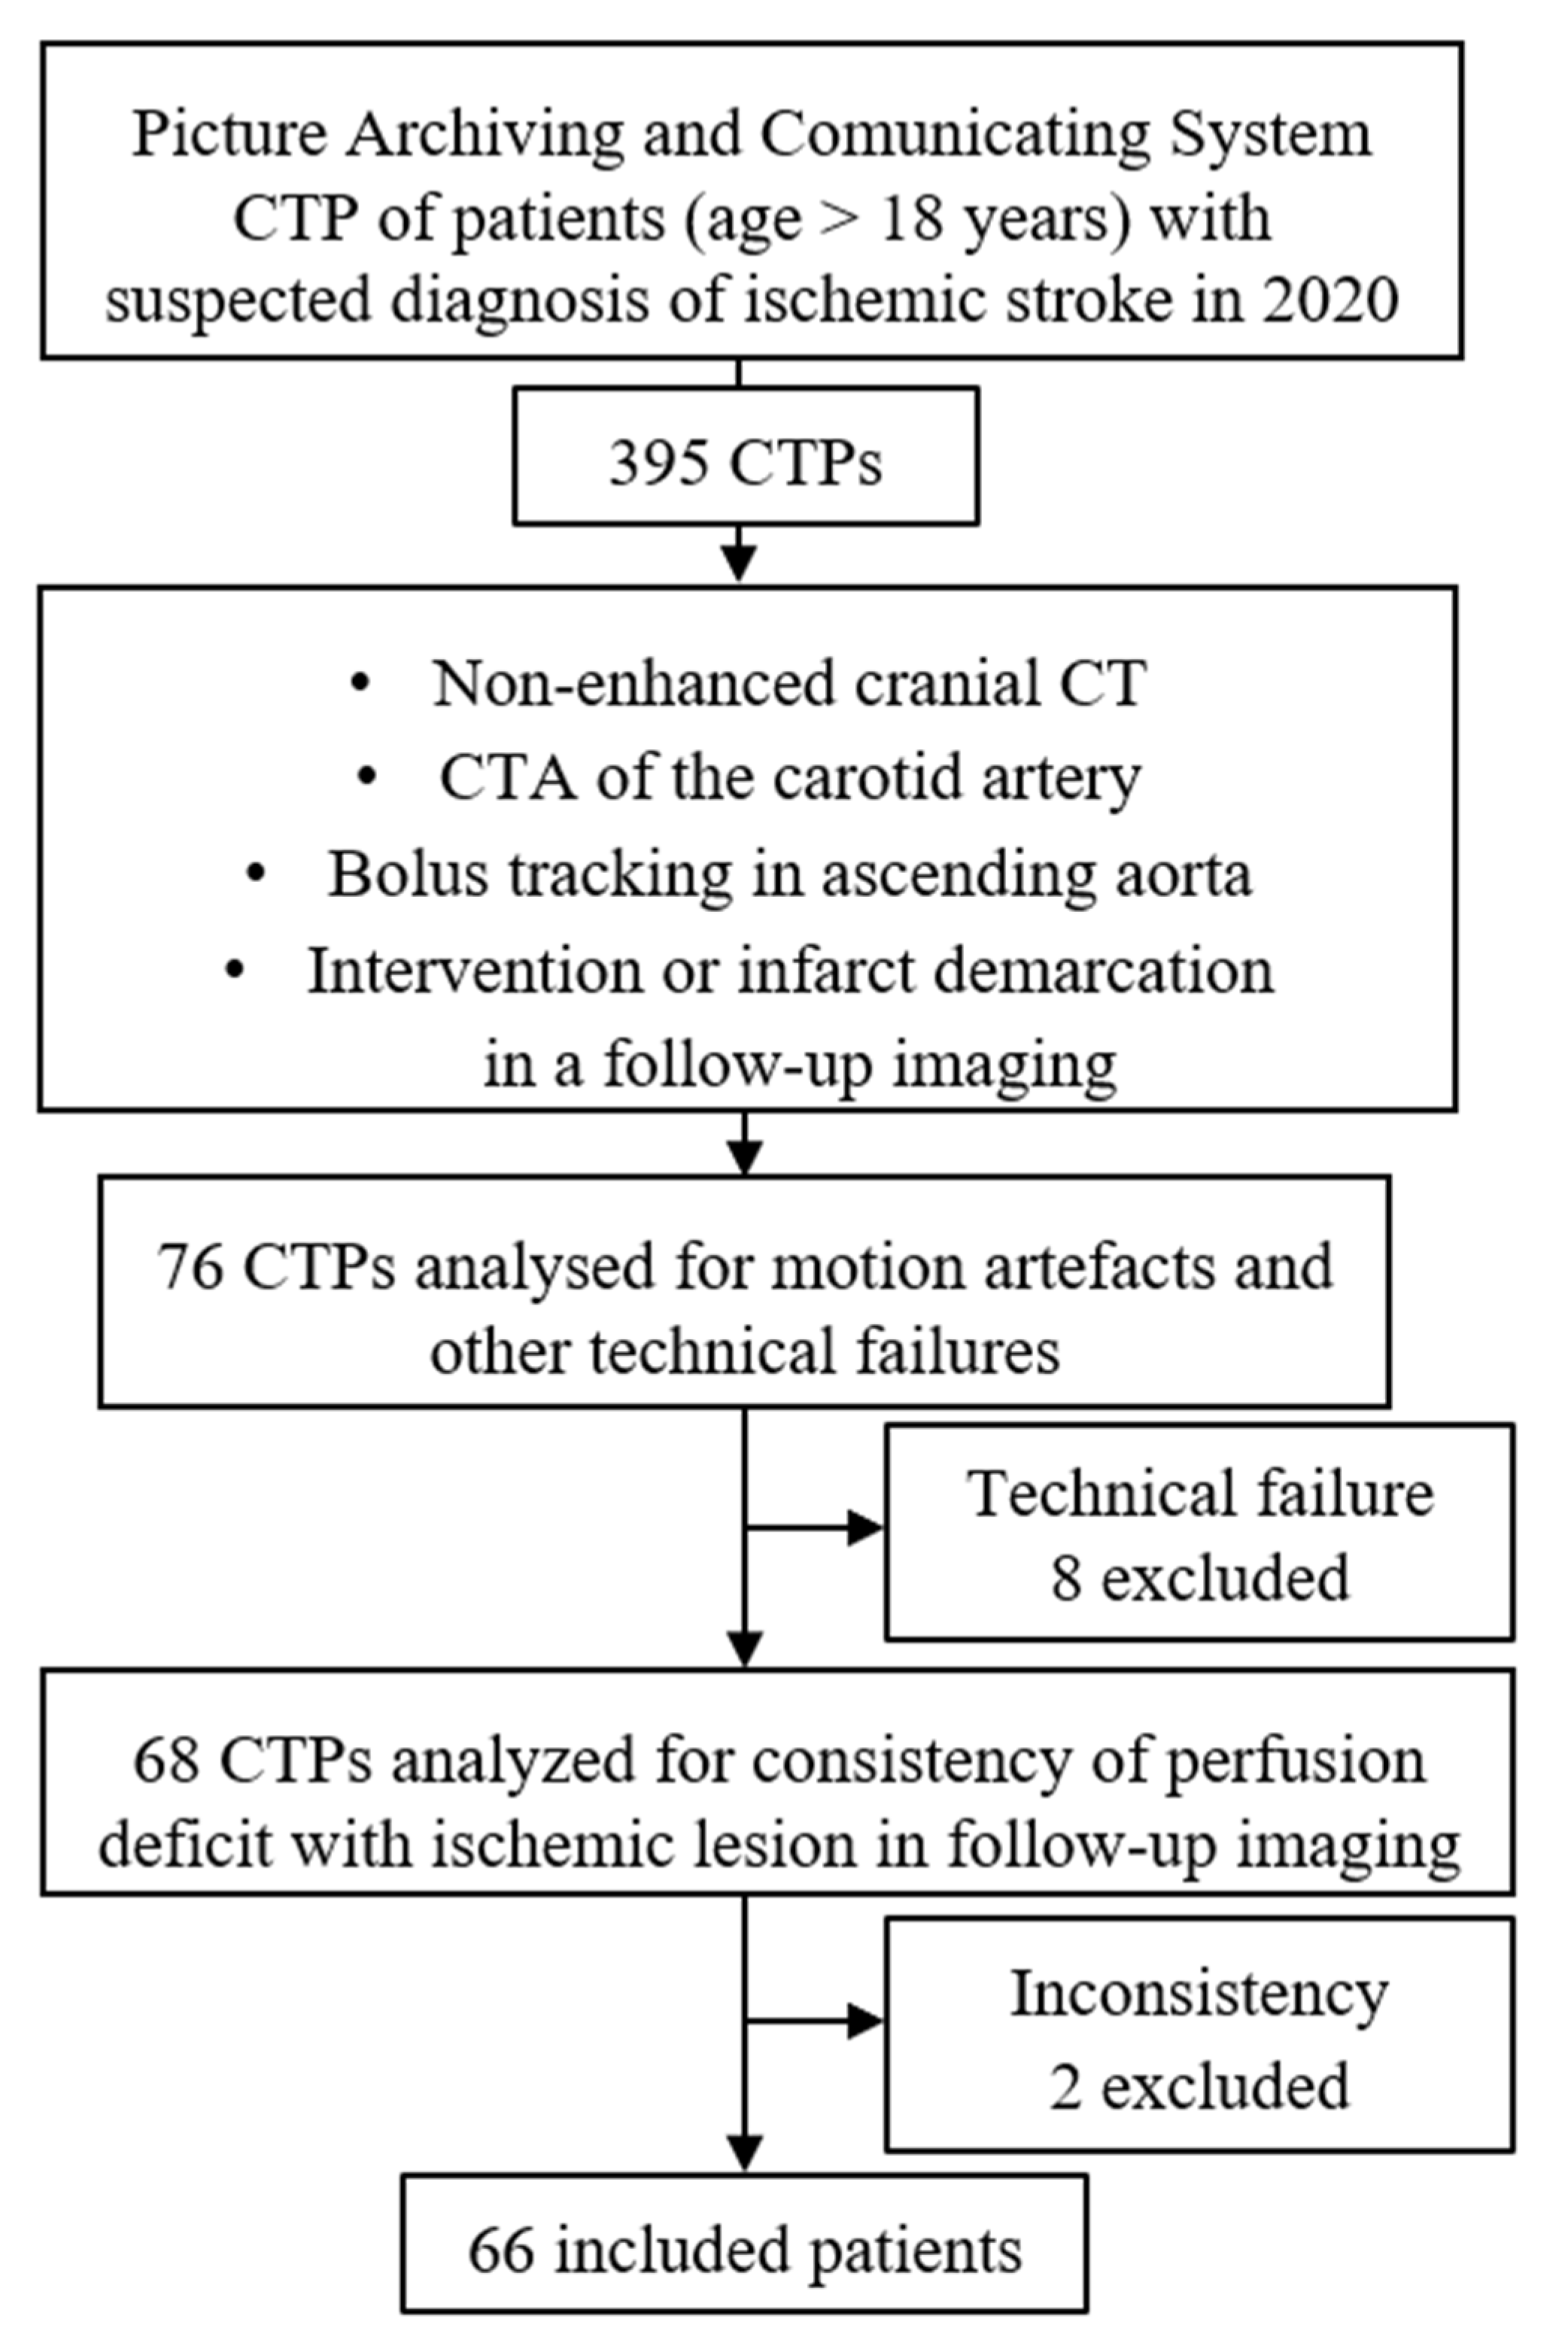 Diagnostics | Free Full-Text | Reduction in Radiation Exposure of CT  Perfusion by Optimized Imaging Timing Using Temporal Information of the  Preceding CT Angiography of the Carotid Artery in the Stroke Protocol